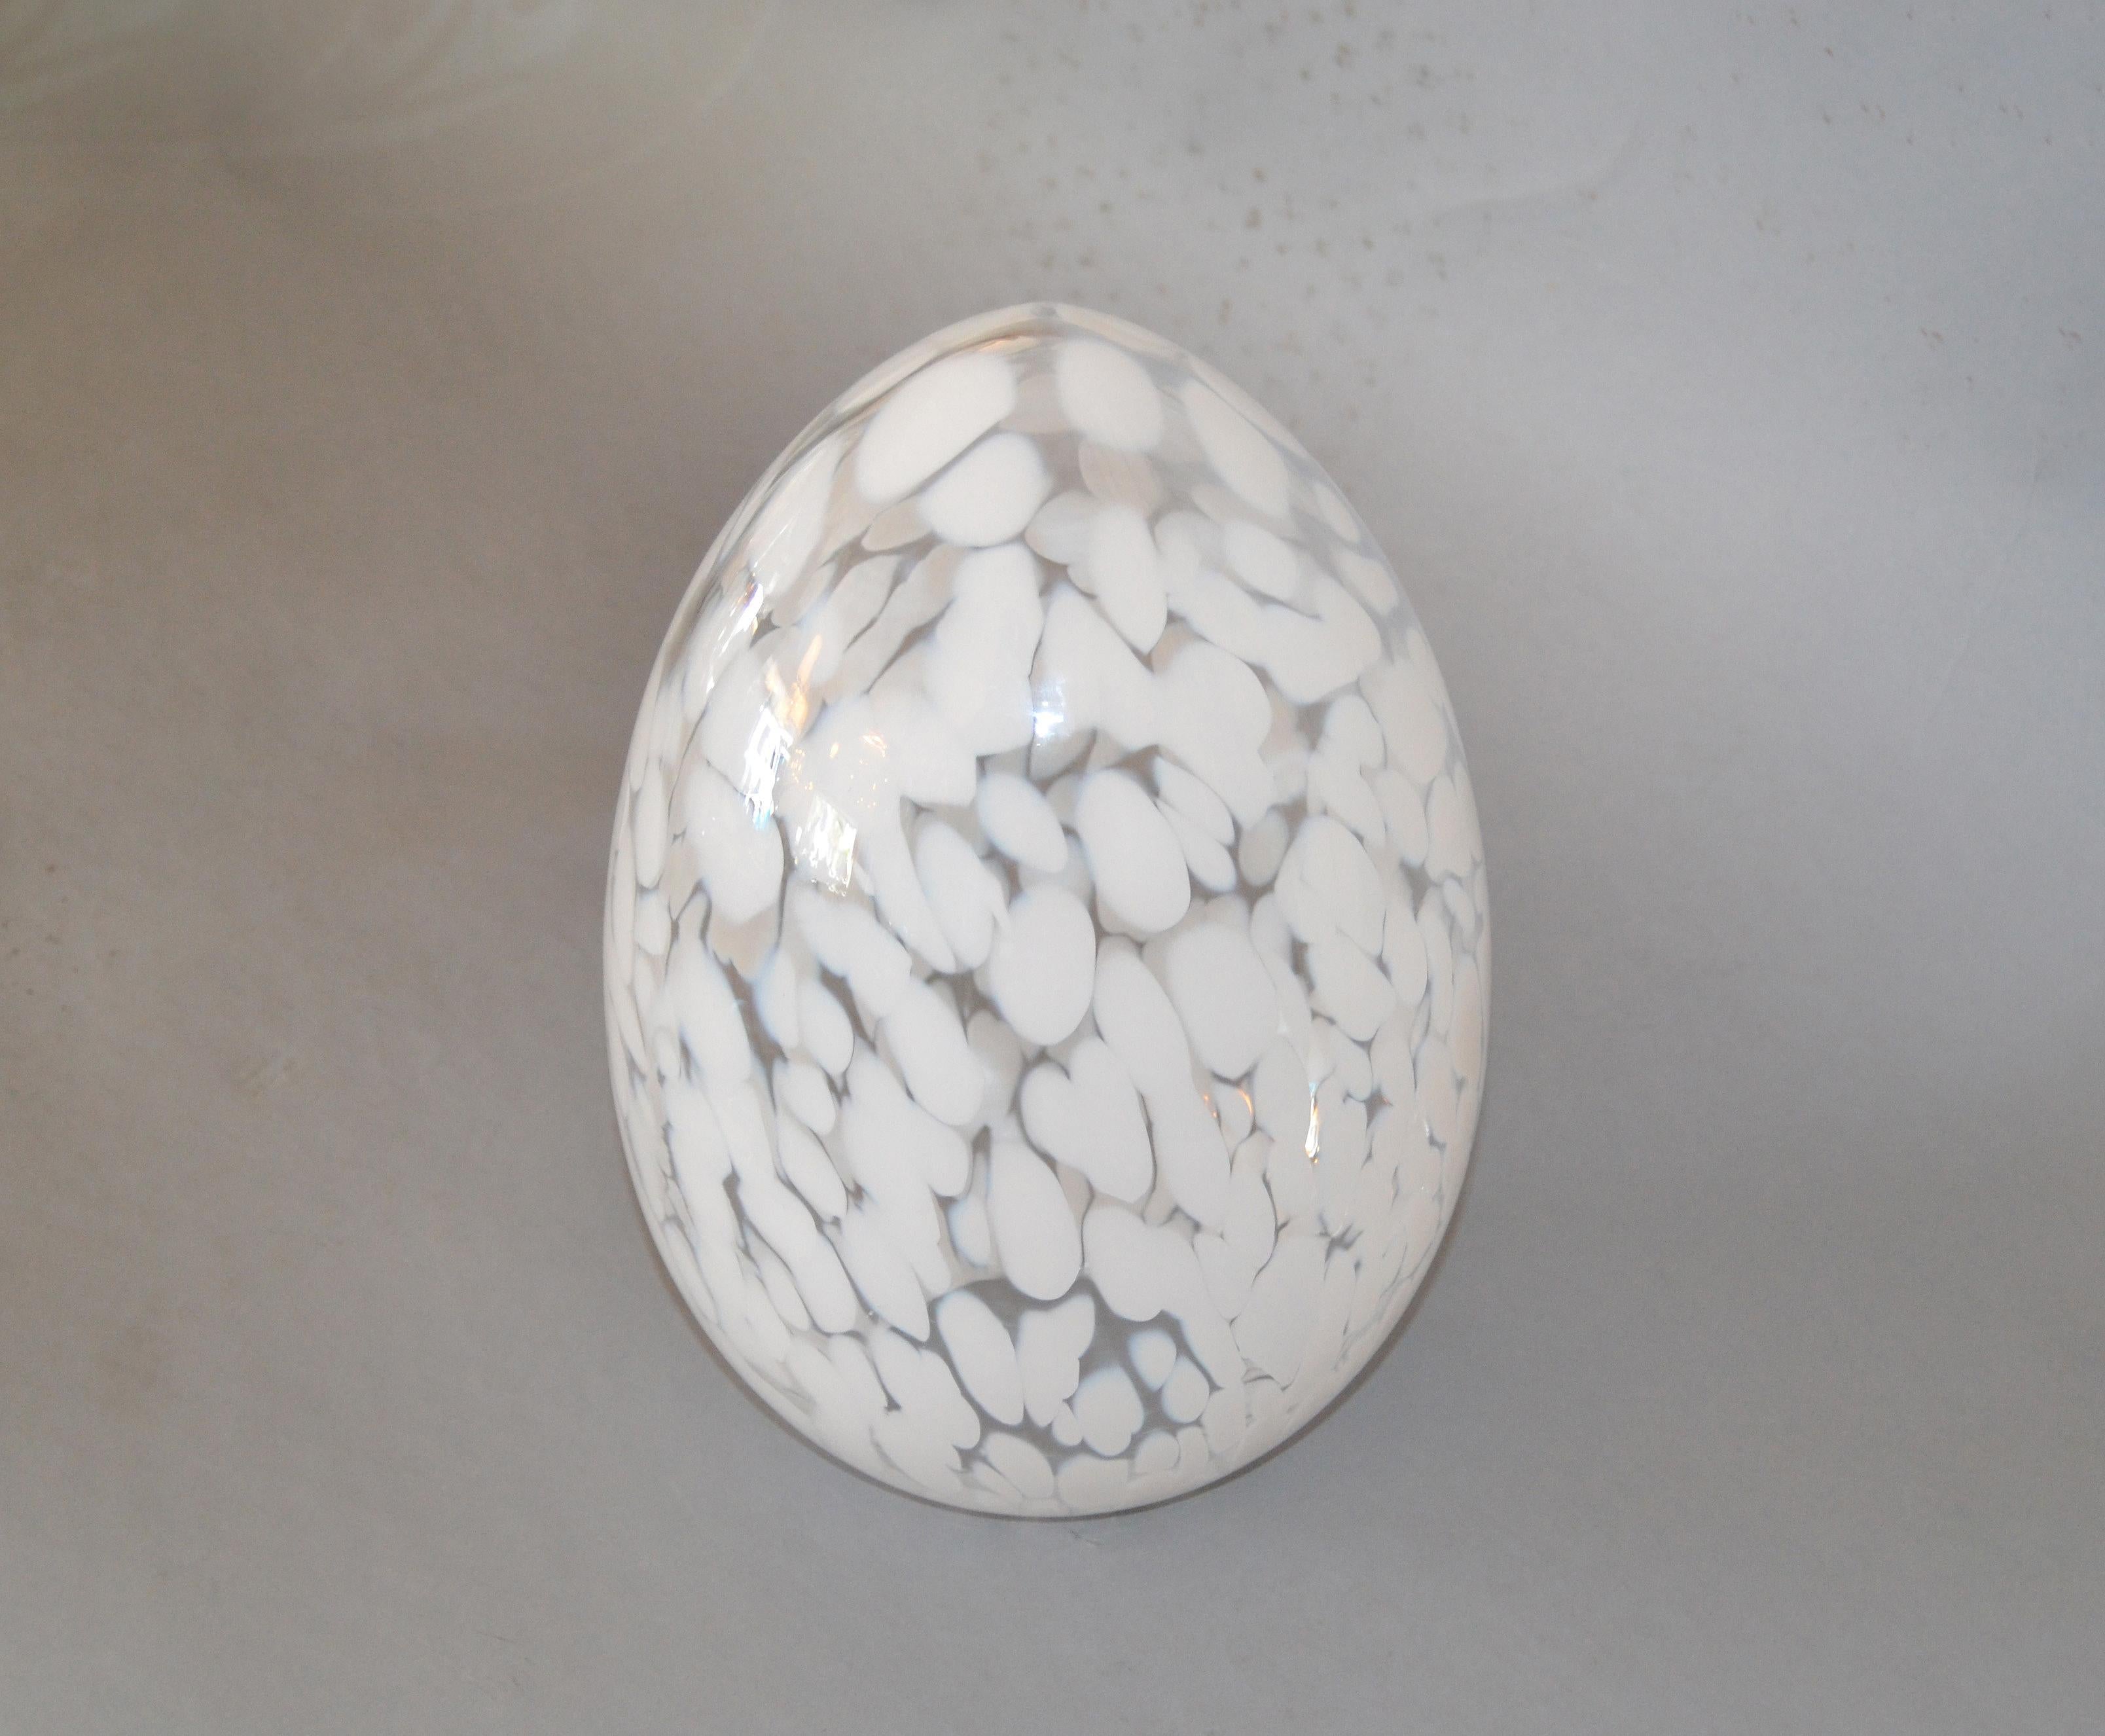 Small hand blown Murano art glass egg sculpture.
Made in Italy.